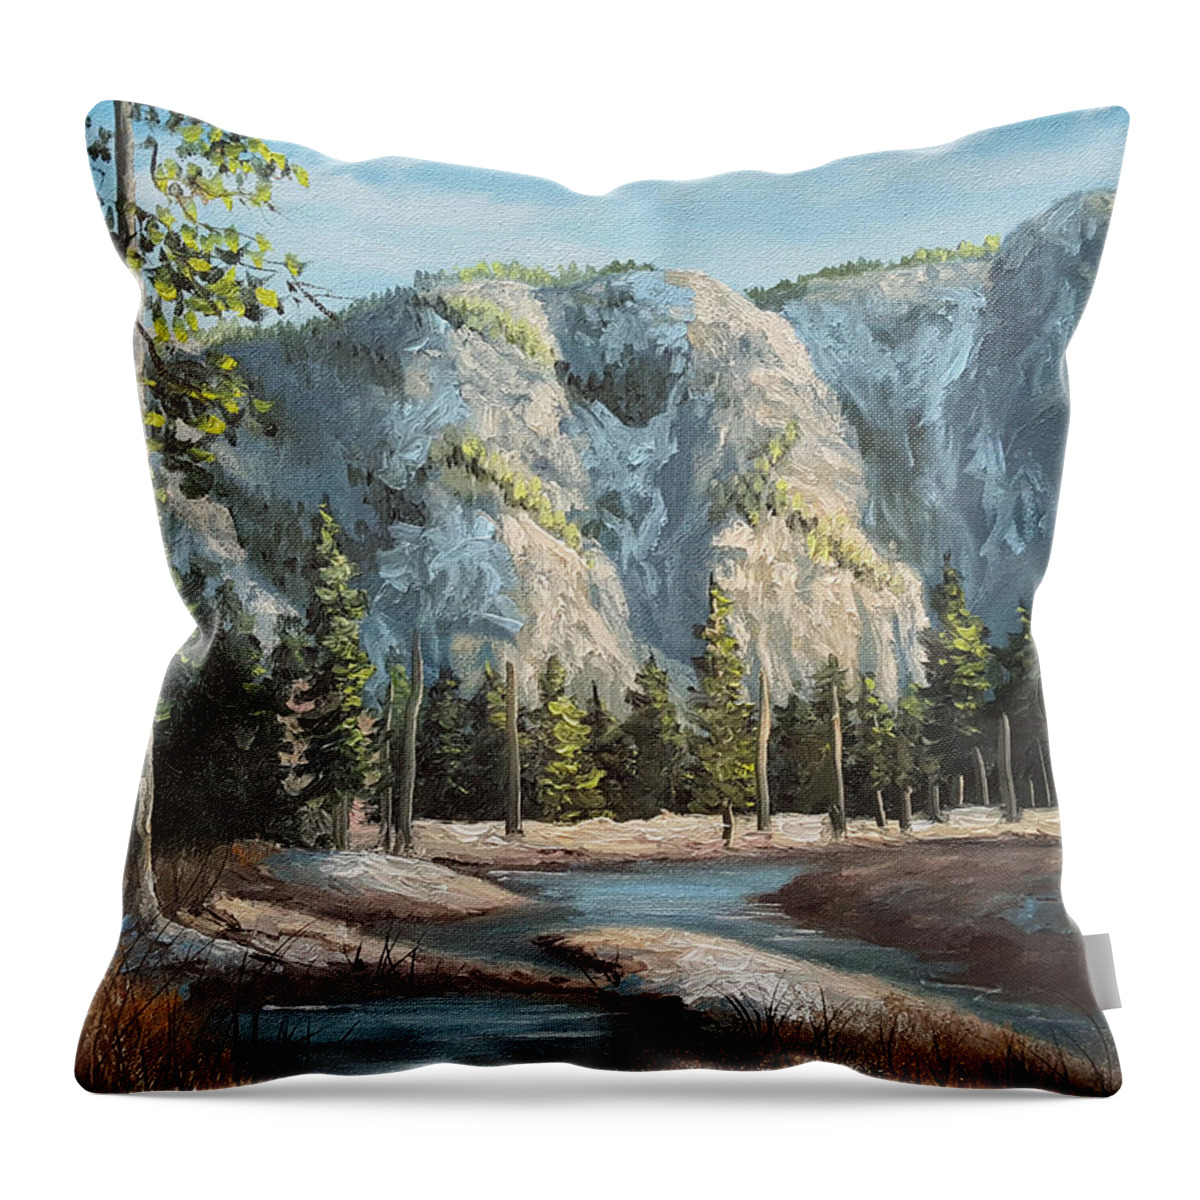 Yosemite Throw Pillow featuring the painting Within Yosemite by Sharon Casavant